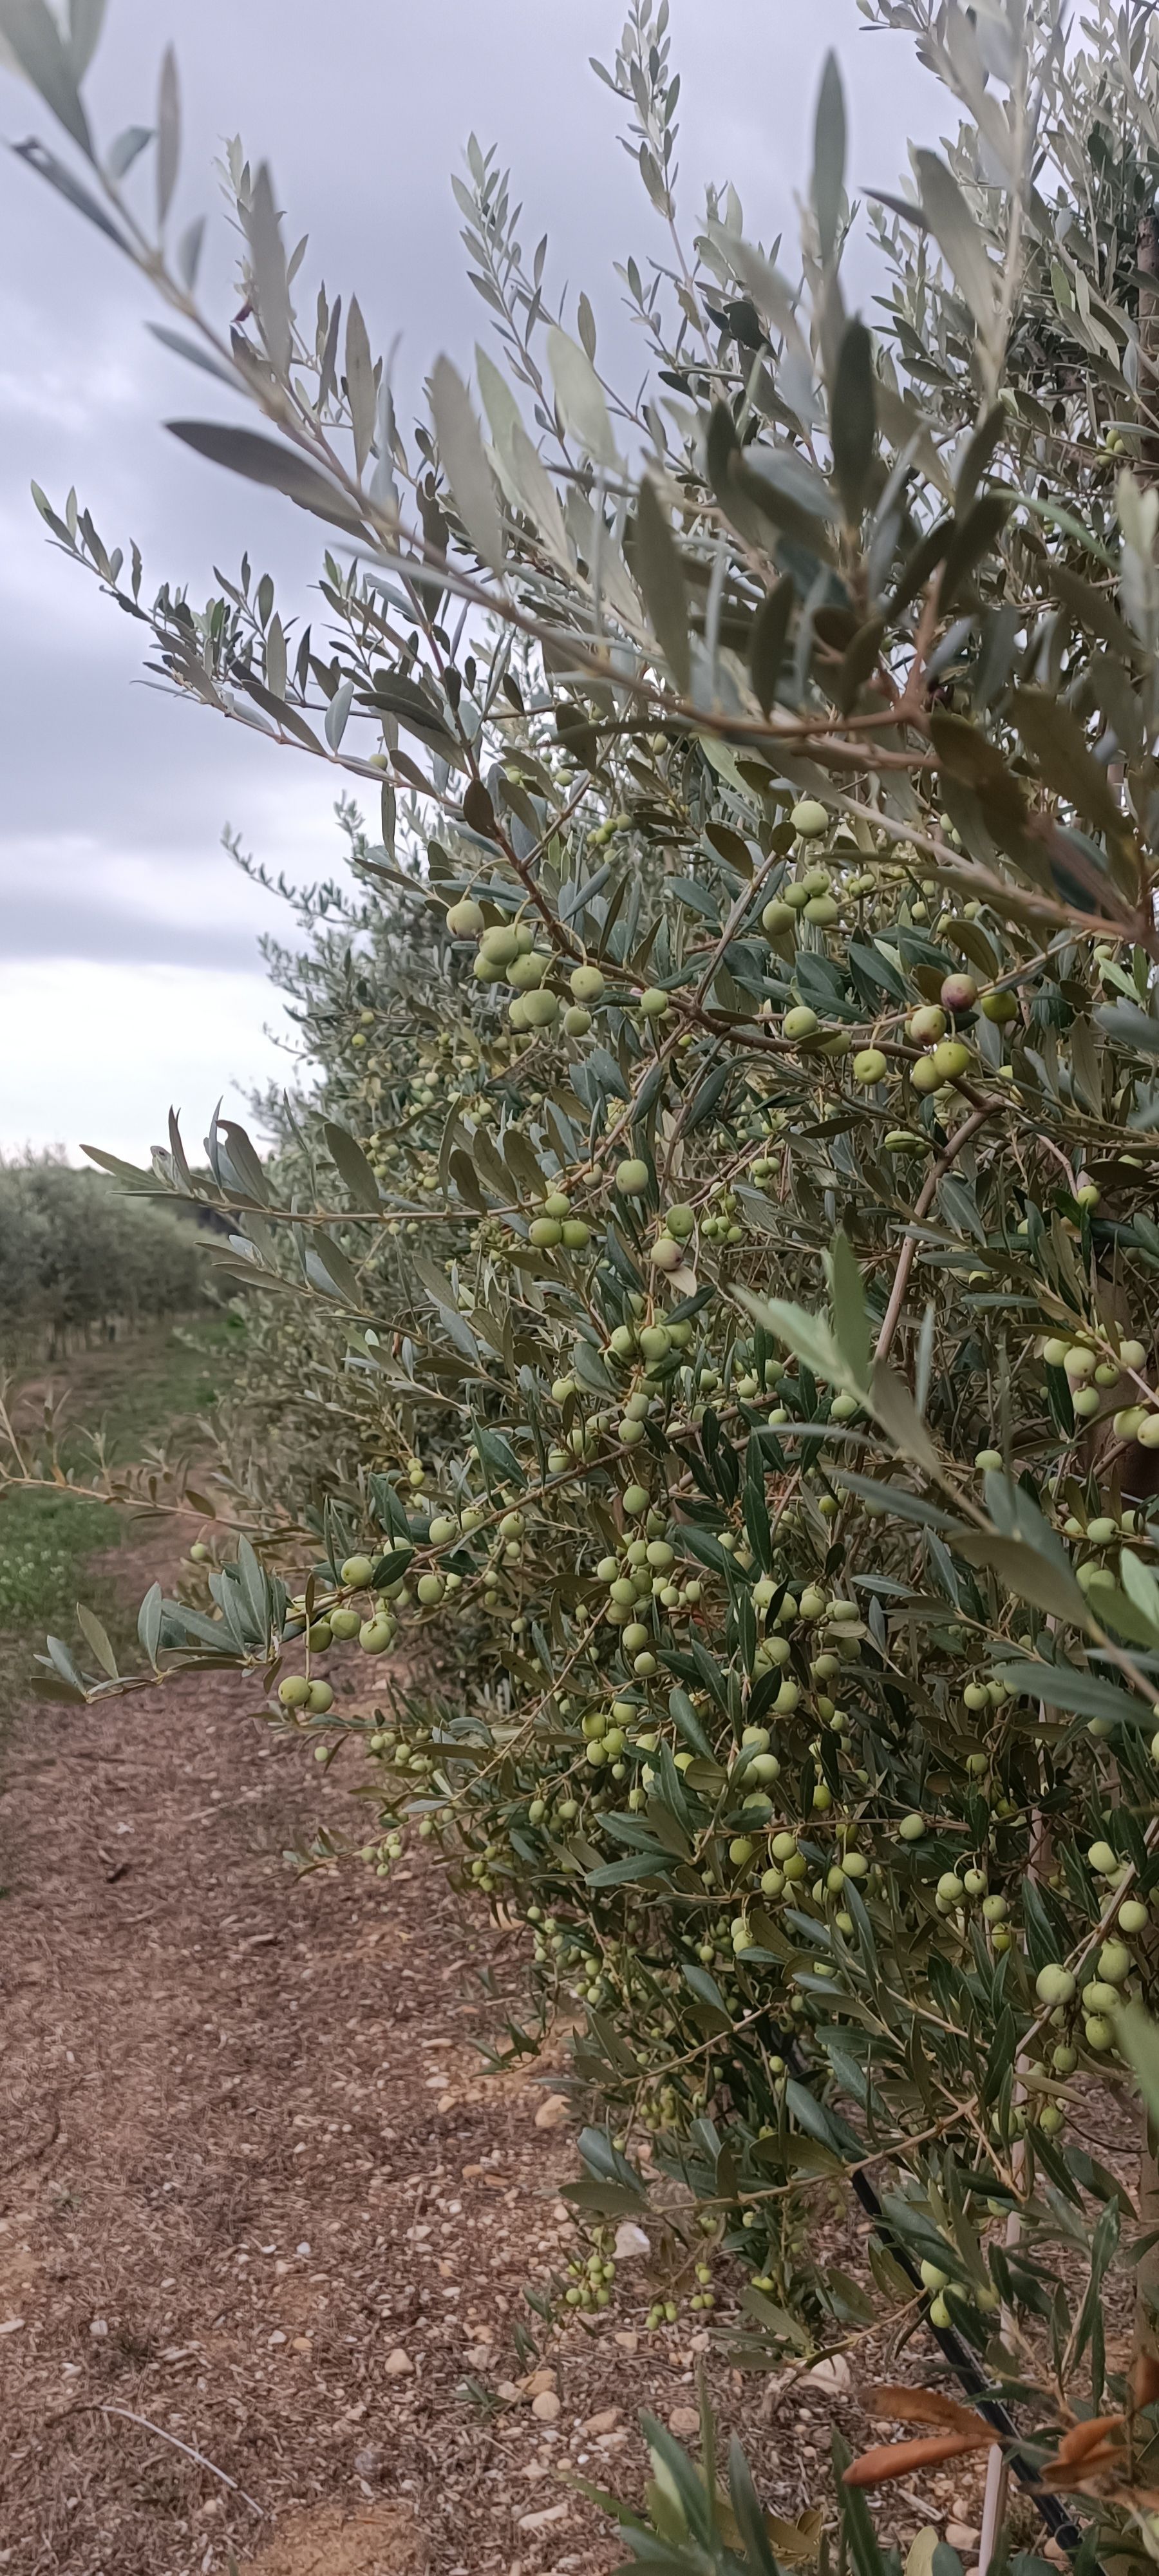 This year, the harvest is certainly lower but the quality of the olives is EXCEPTIONAL.